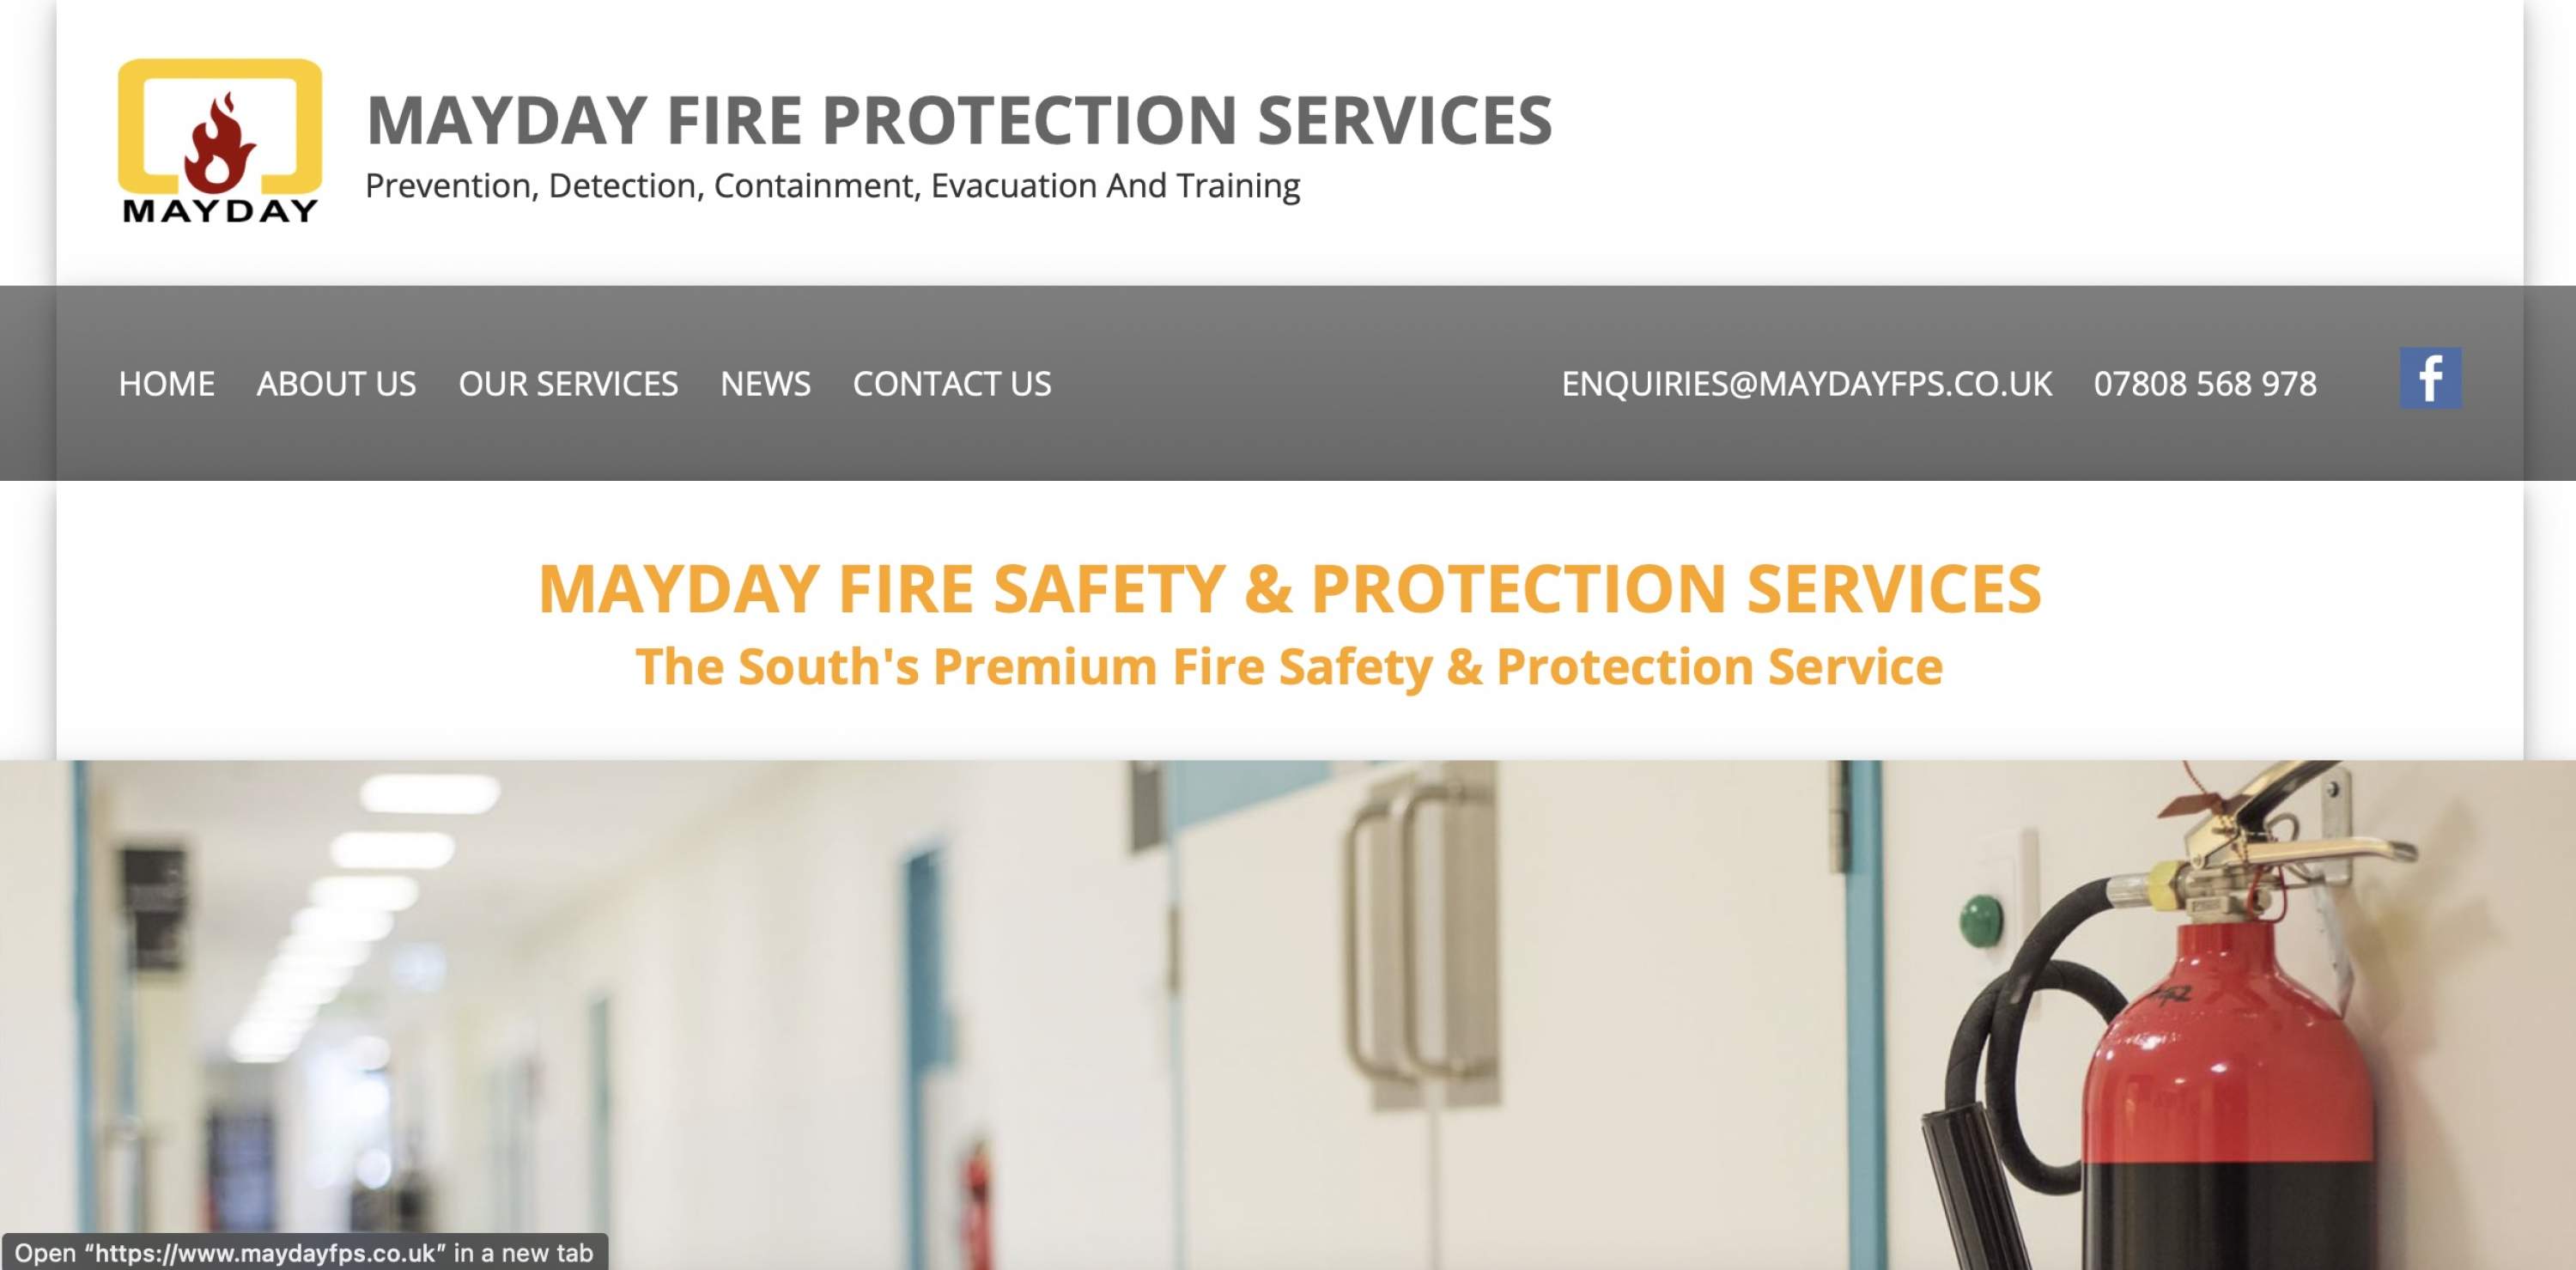 MayDay FIre Protection Services